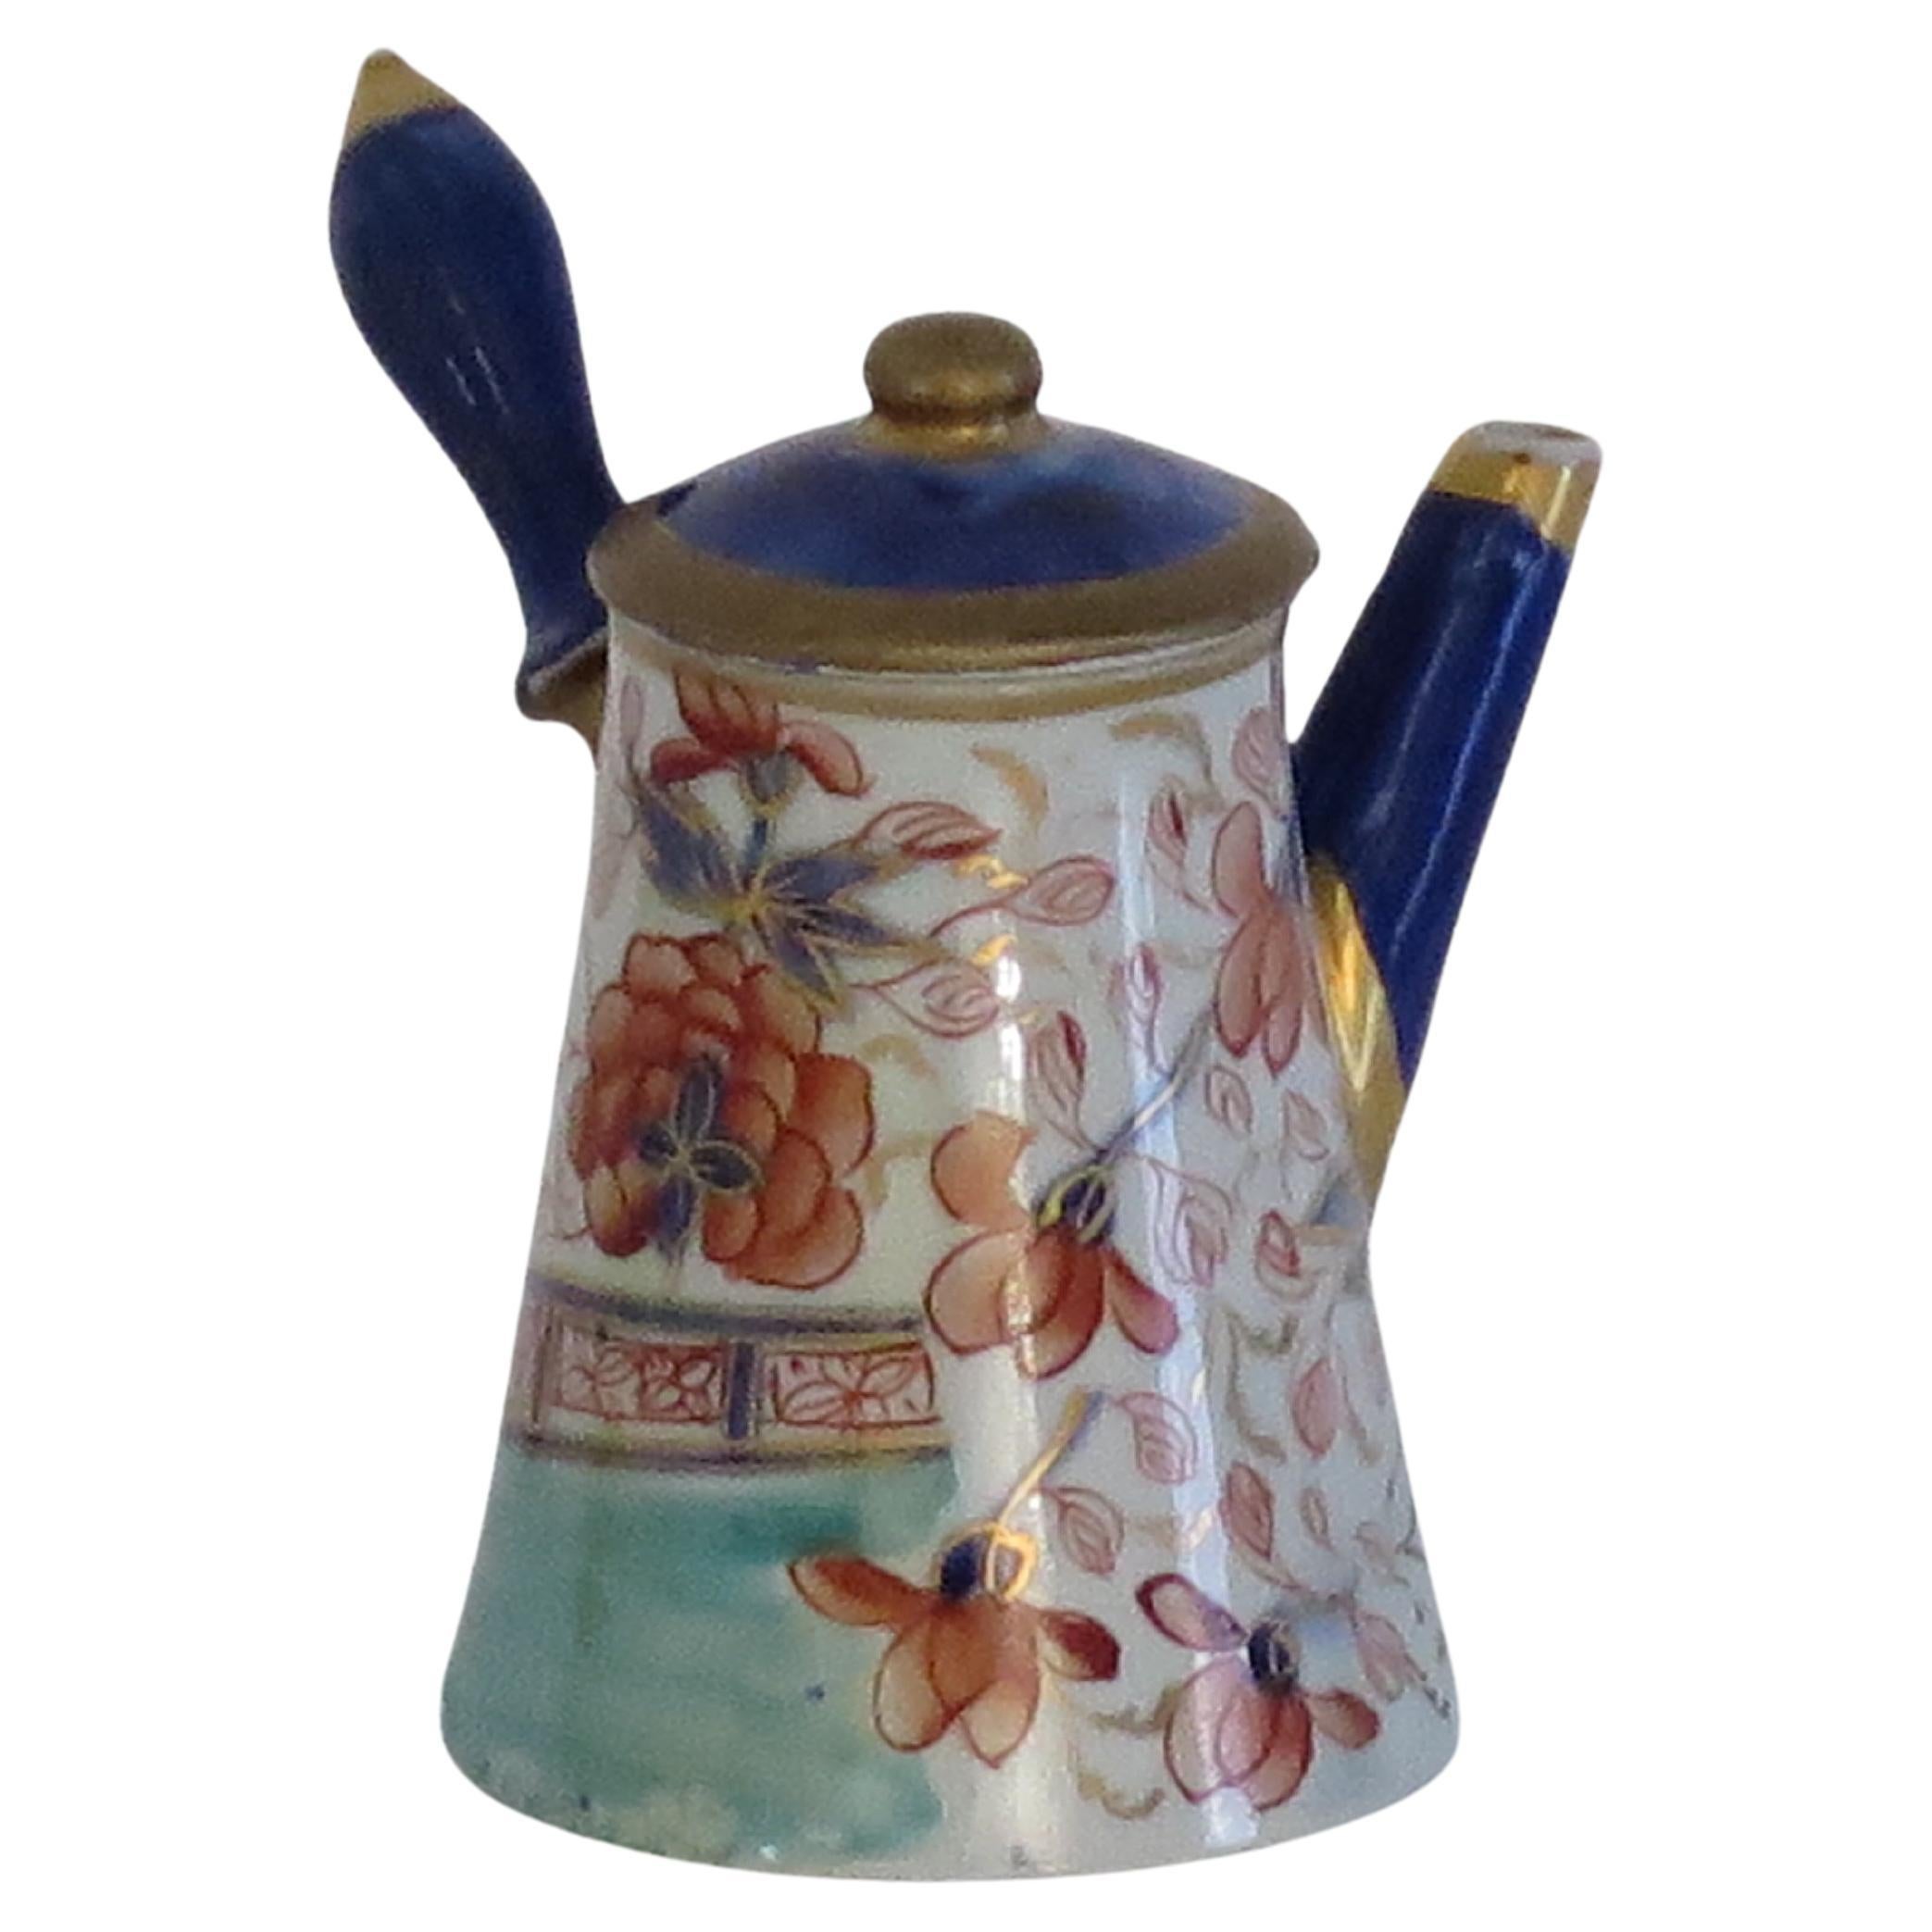 This is a very rare Mason's ironstone miniature Coffee Pot in the Gold Rose Japan gilded pattern, which we date to circa 1820.

Miniature or toy items of Masons ironstone are hard to find today.

This piece is well potted as a Coffeepot with a